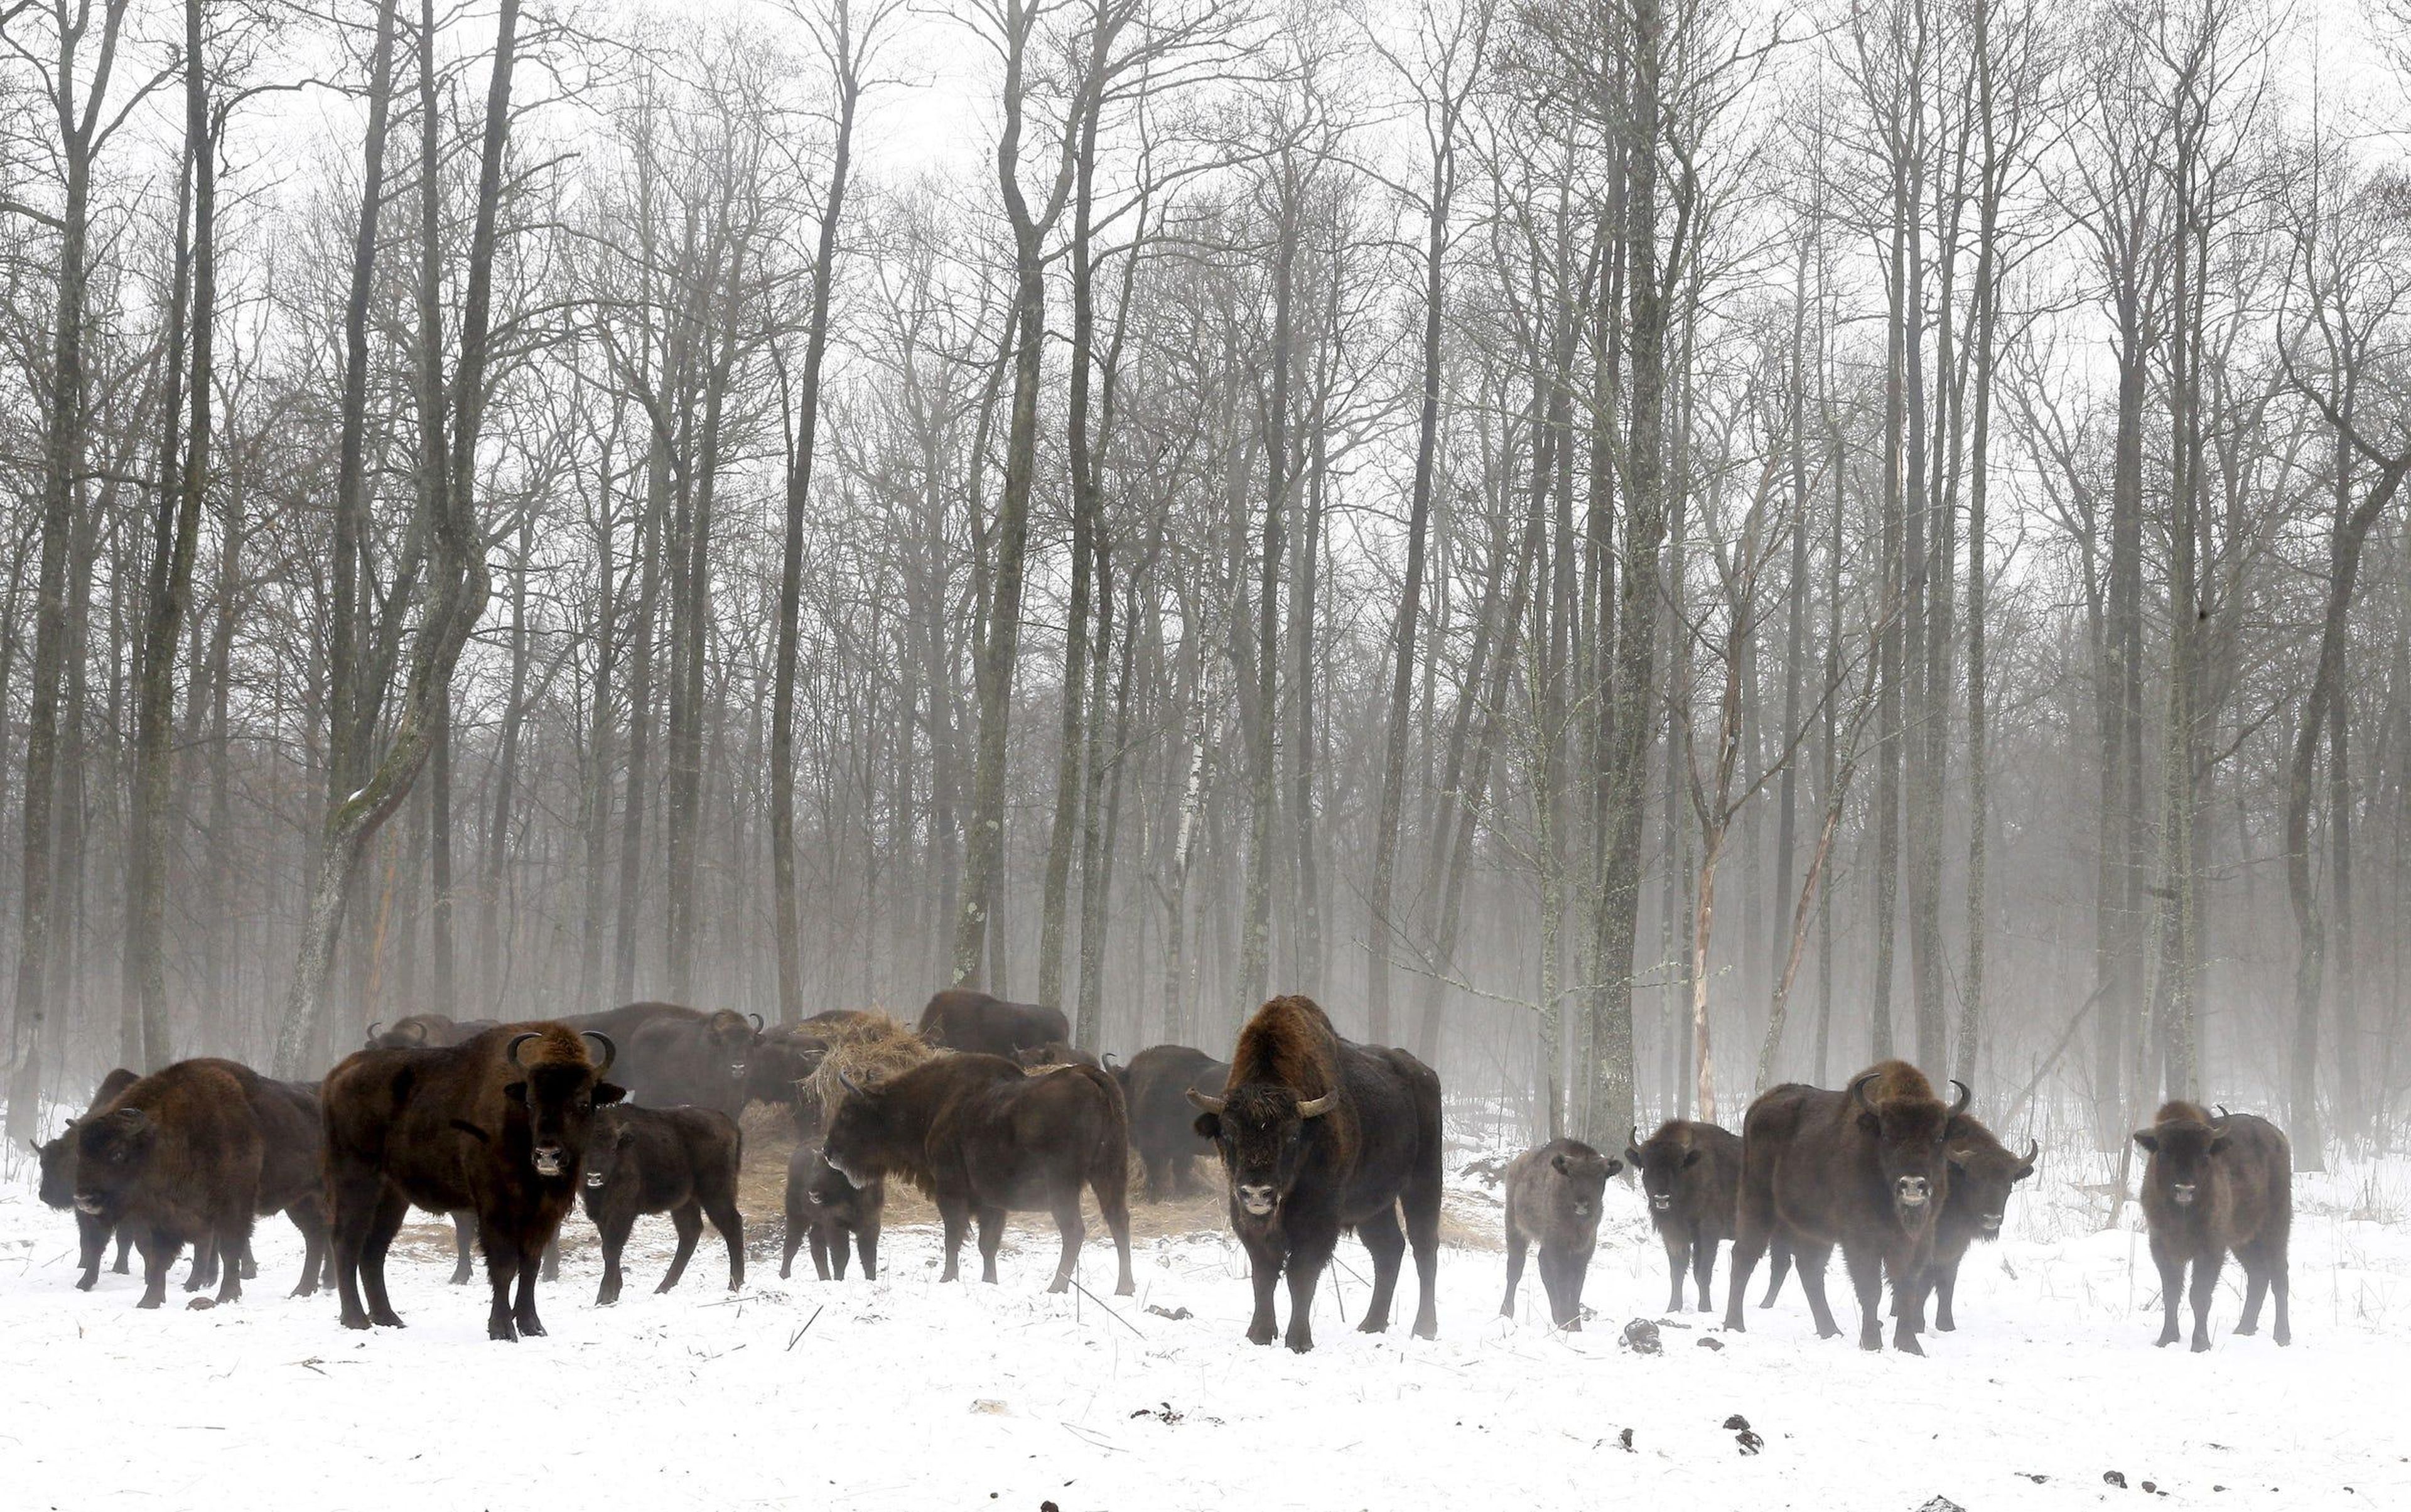 Bisons are seen at a bison nursery in the exclusion zone around the Chernobyl nuclear reactor near the abandoned village of Dronki, Belarus, January 28, 2016.